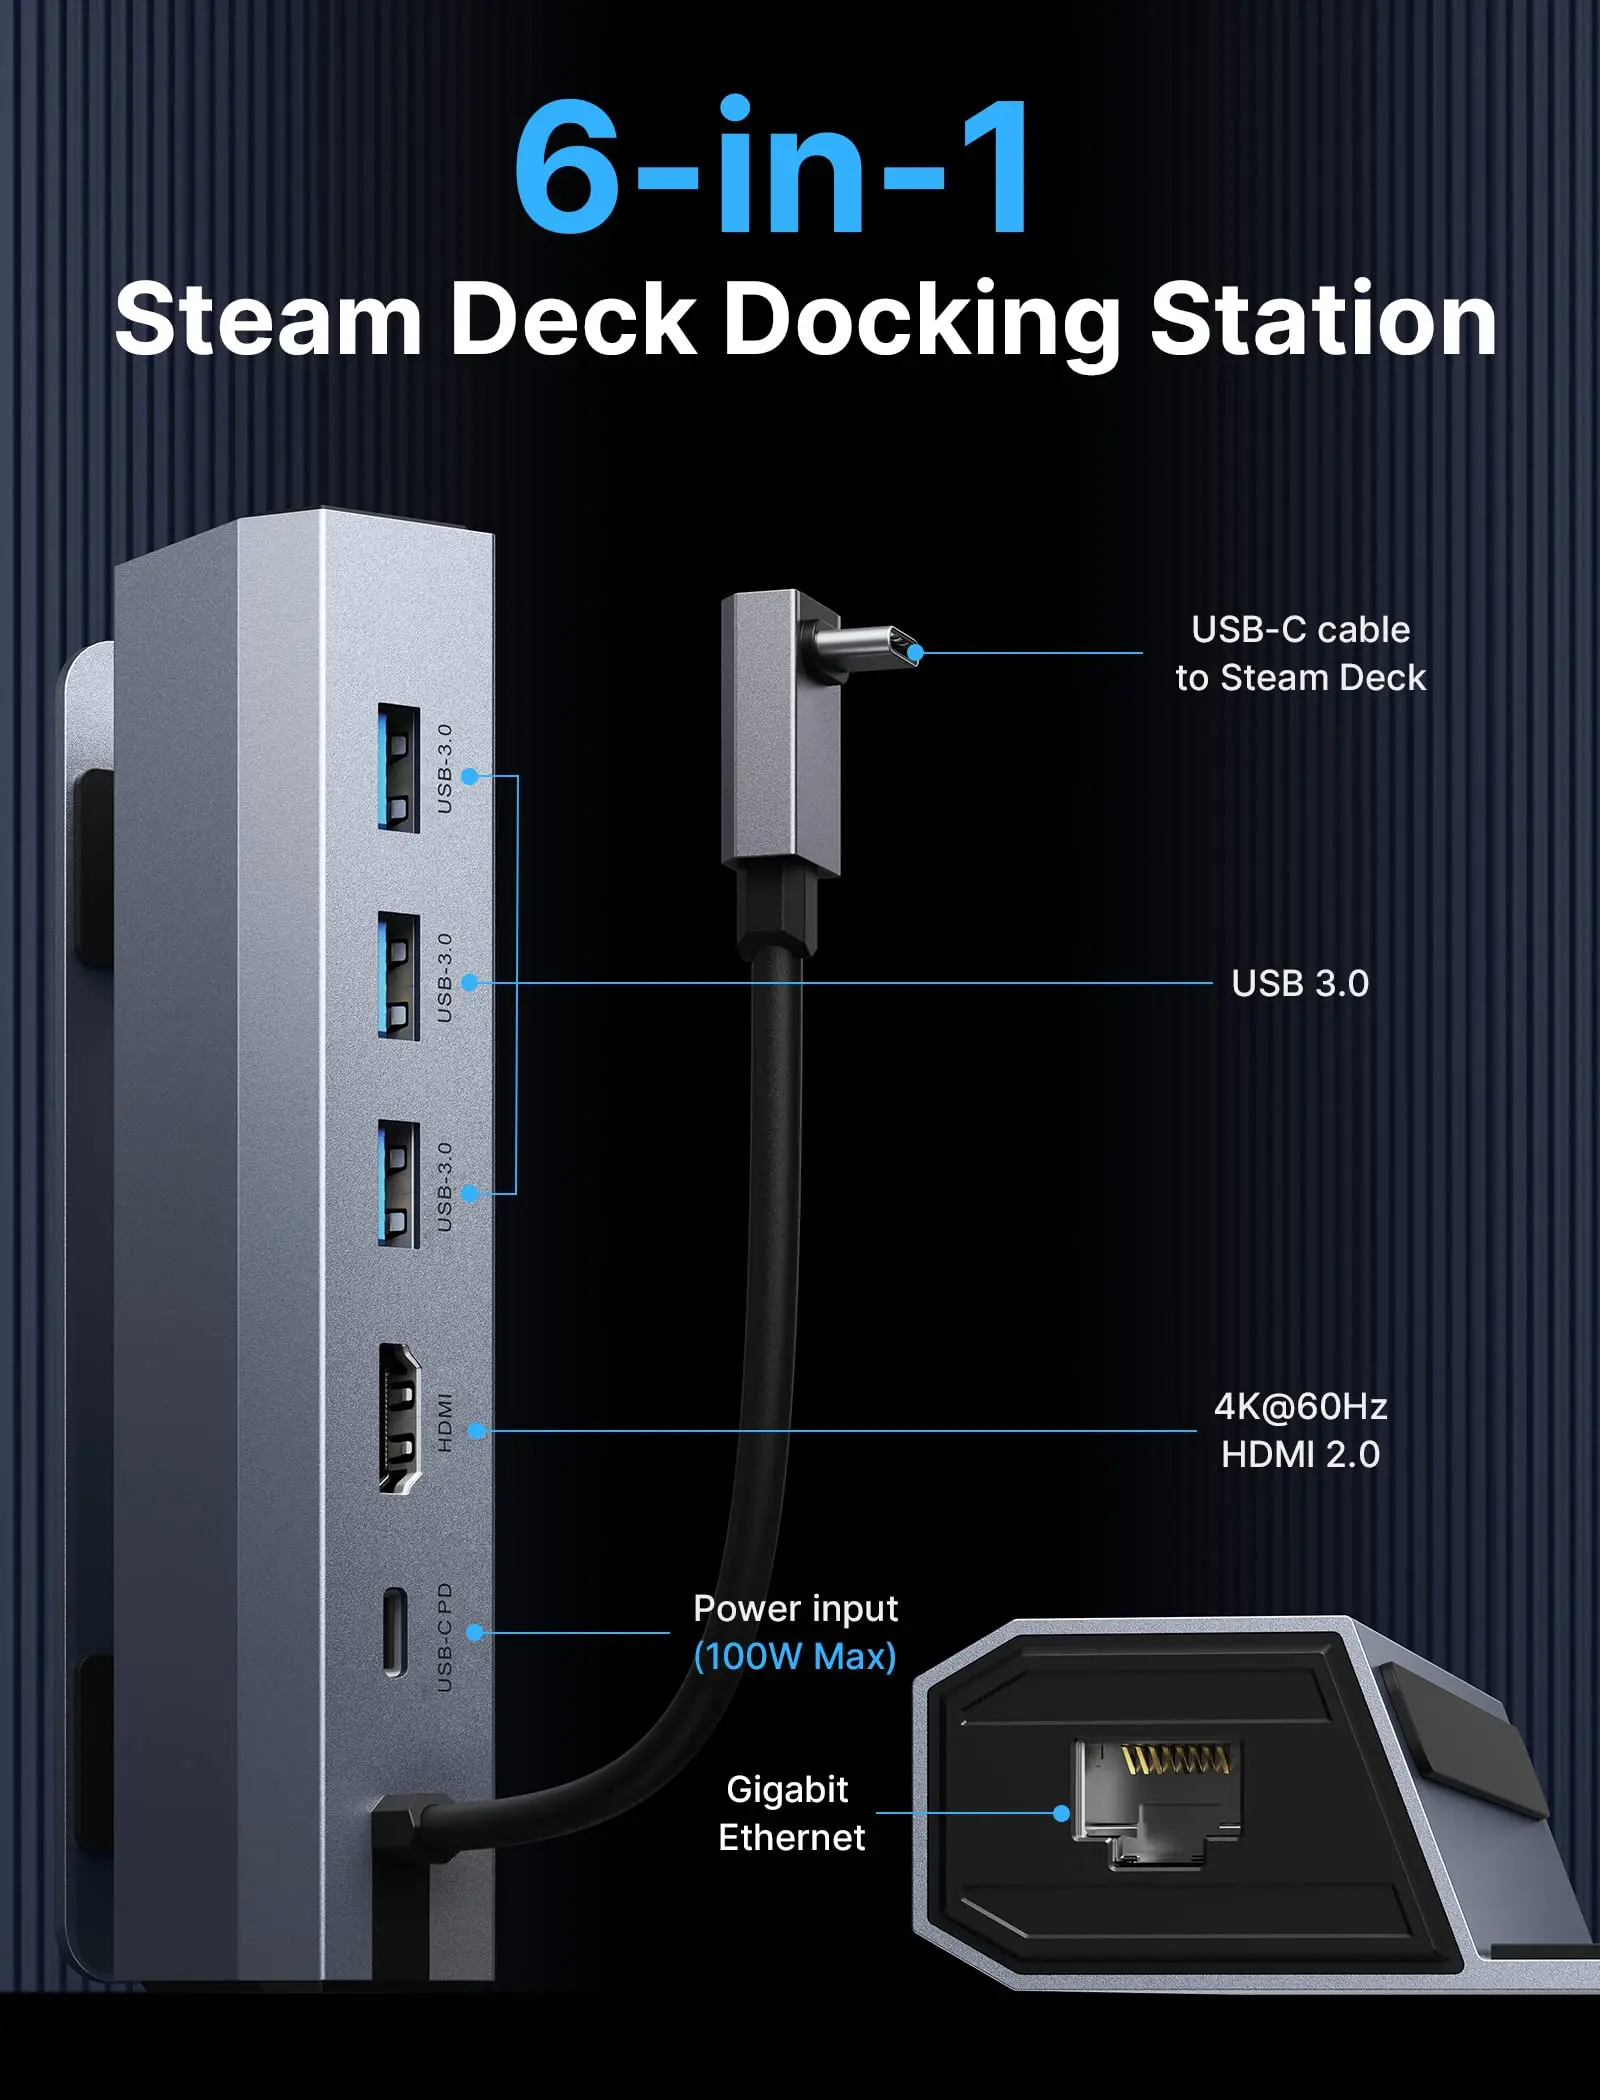 Dock your Steam Deck/ROG Ally in this 6-in-1 docking station with